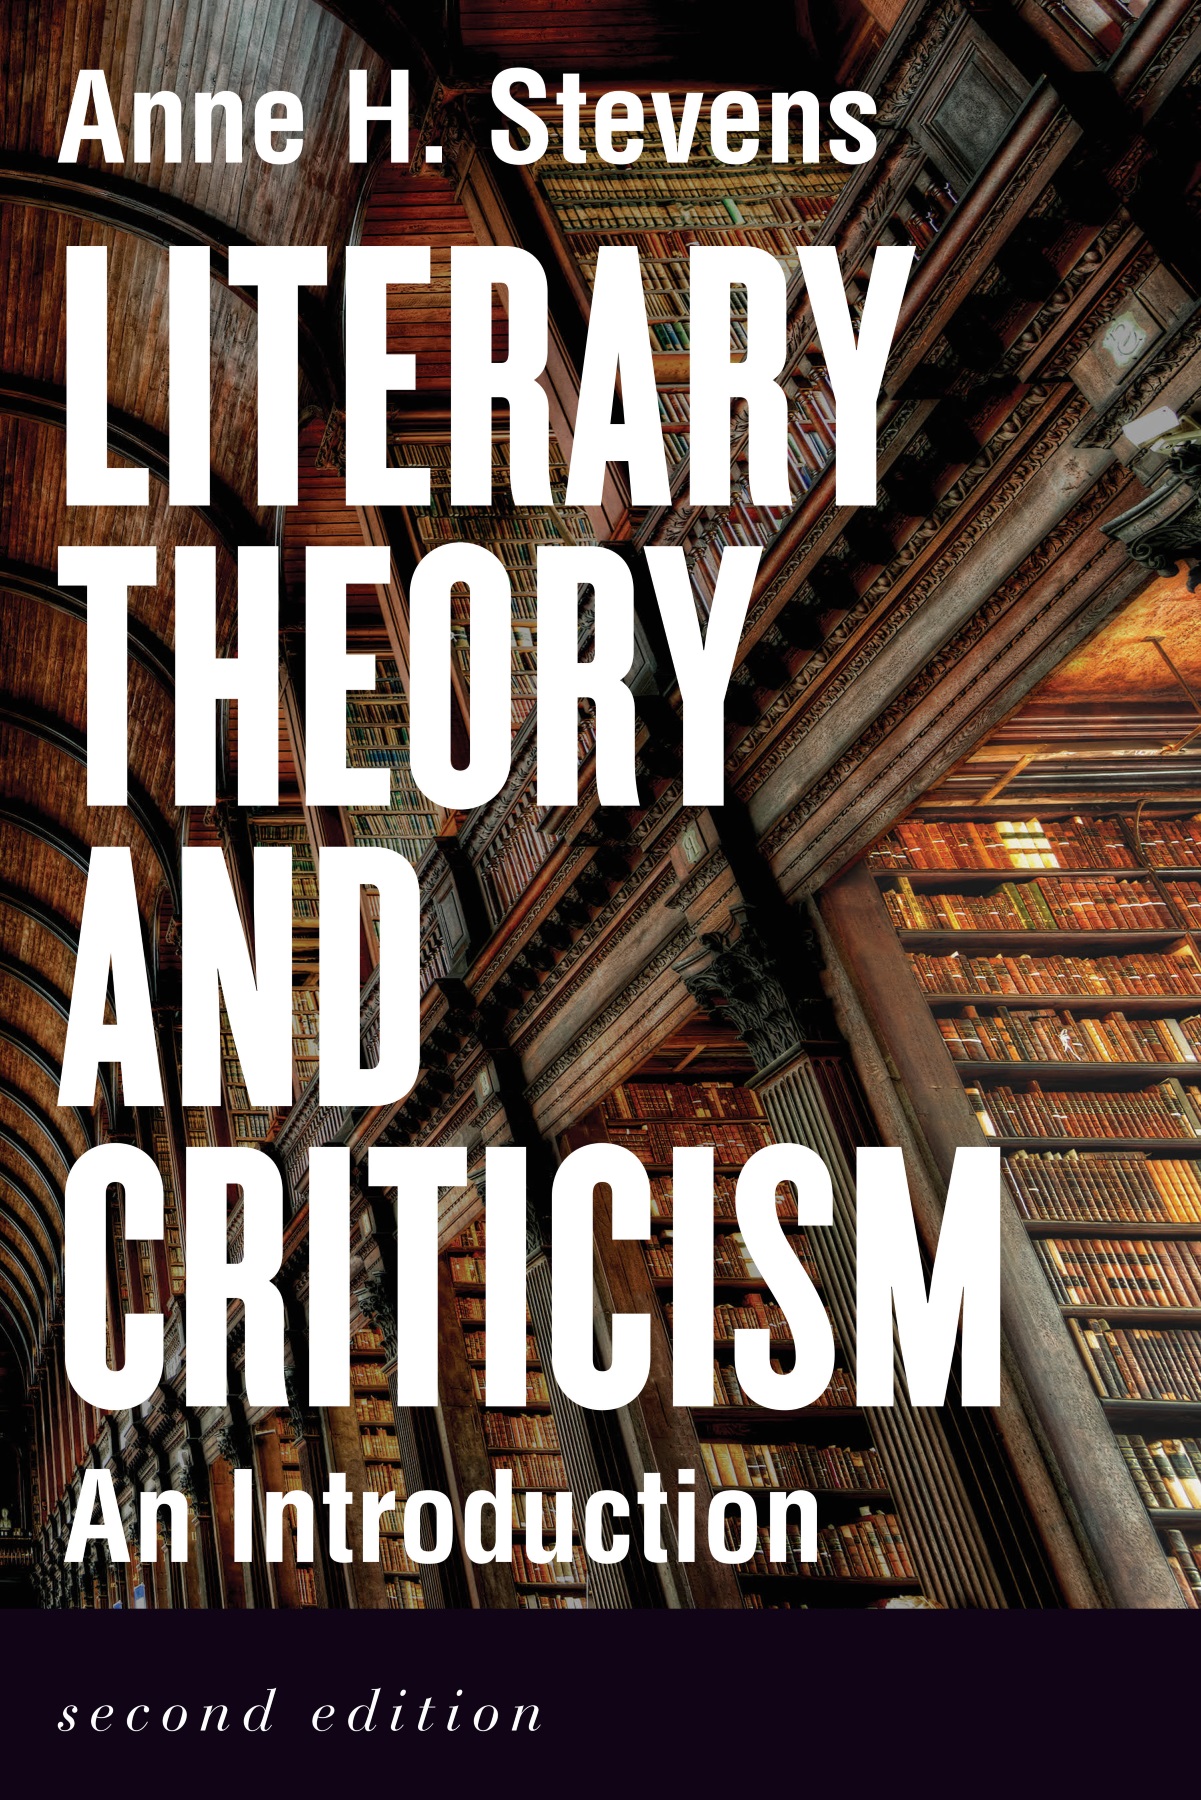 research and literary criticism